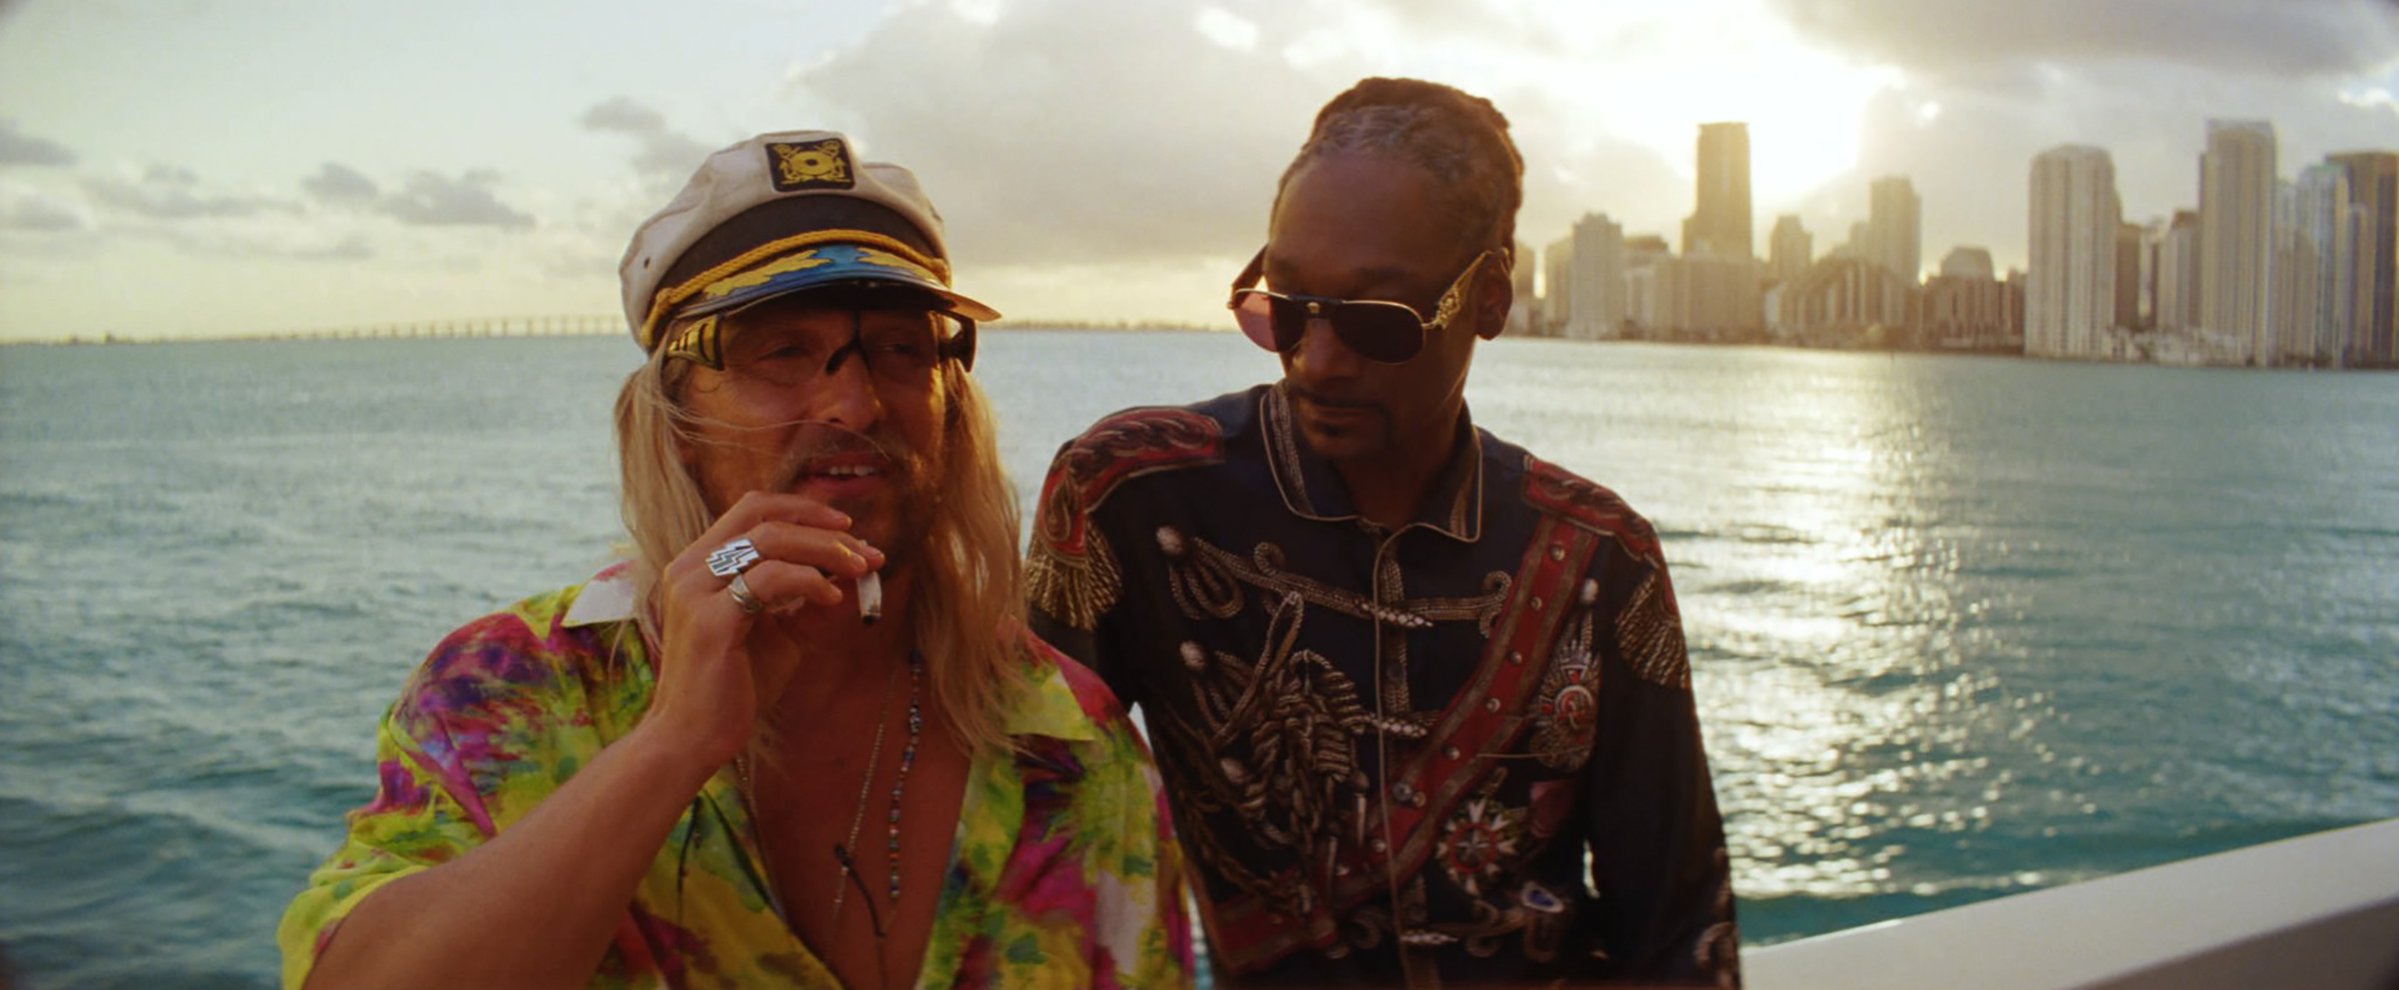 McConaughey mugs with rapper friend Lingerie, played by none other than Snoop Dogg